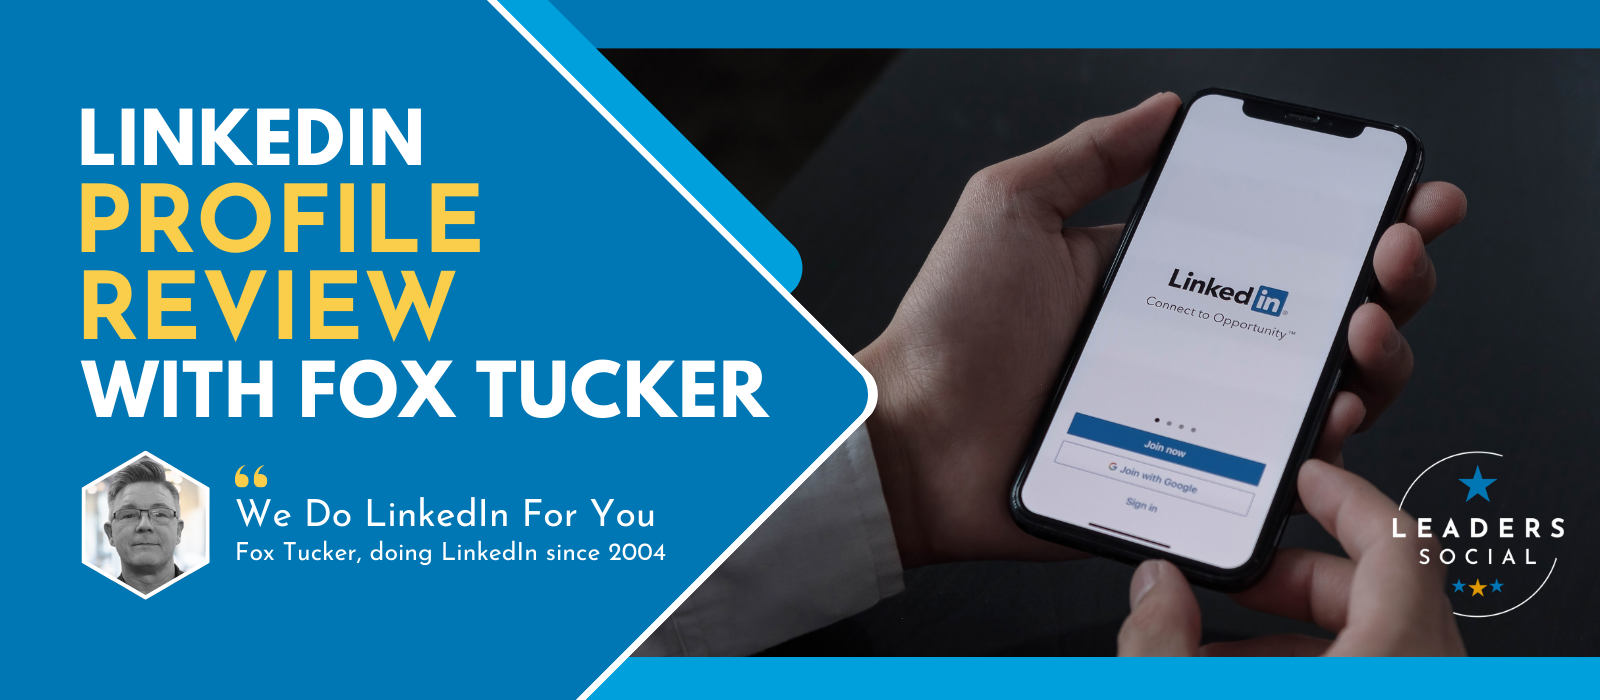 LinkedIn Profile Review with Fox Tucker